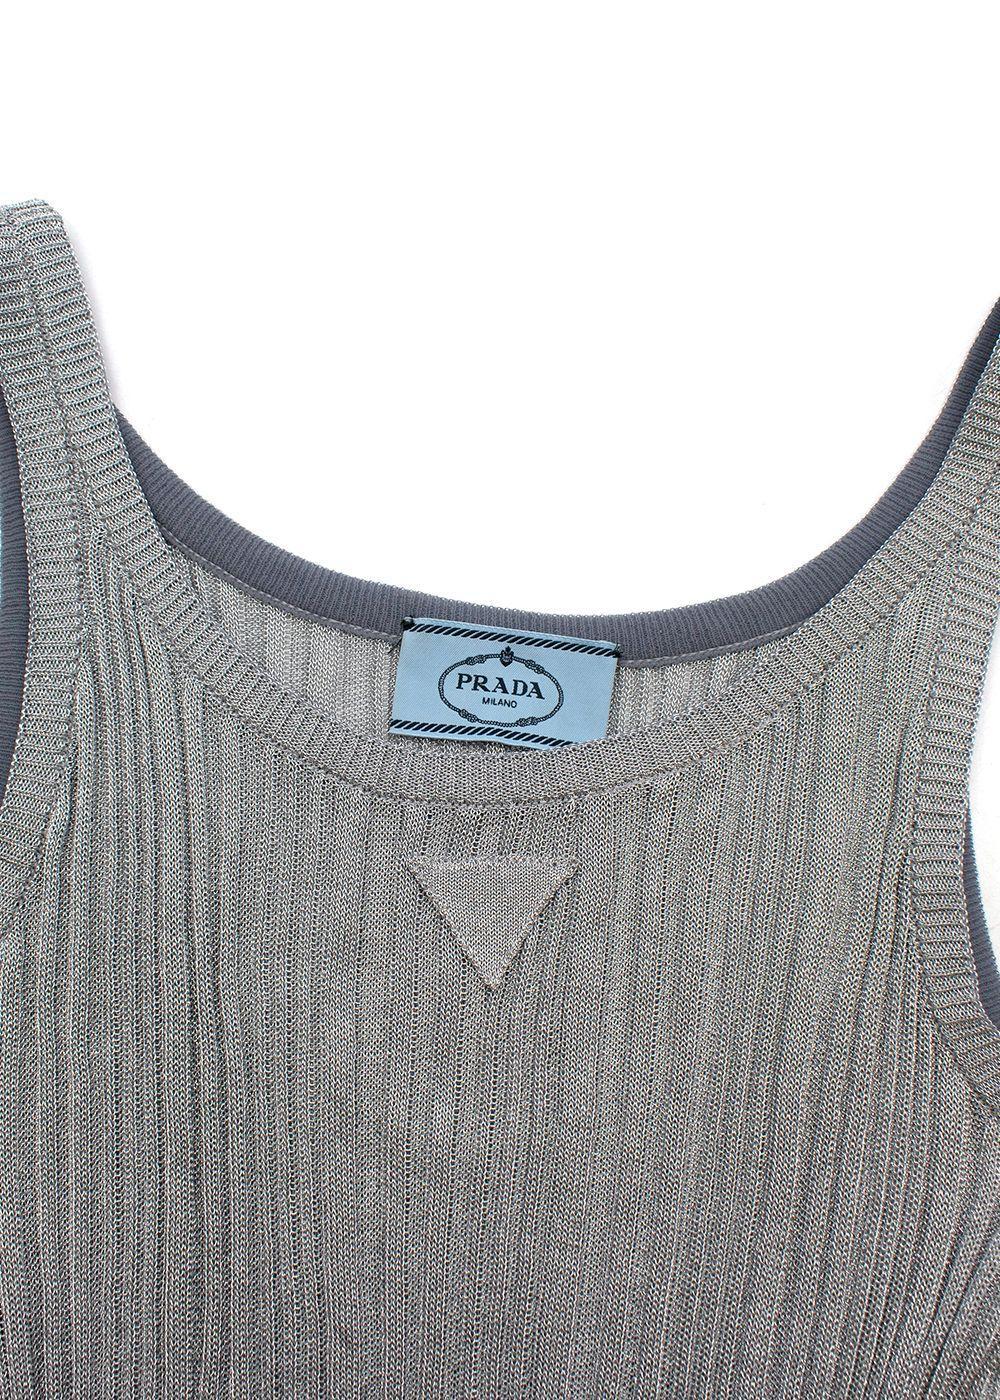 Prada silver lurex plisse knit tank dress

A precious motif formed by different types of ribbing creates a sunray pleat effect in this elegant, luminous dress. This lamé style embodies the technical know-how of the brand, which is capable of